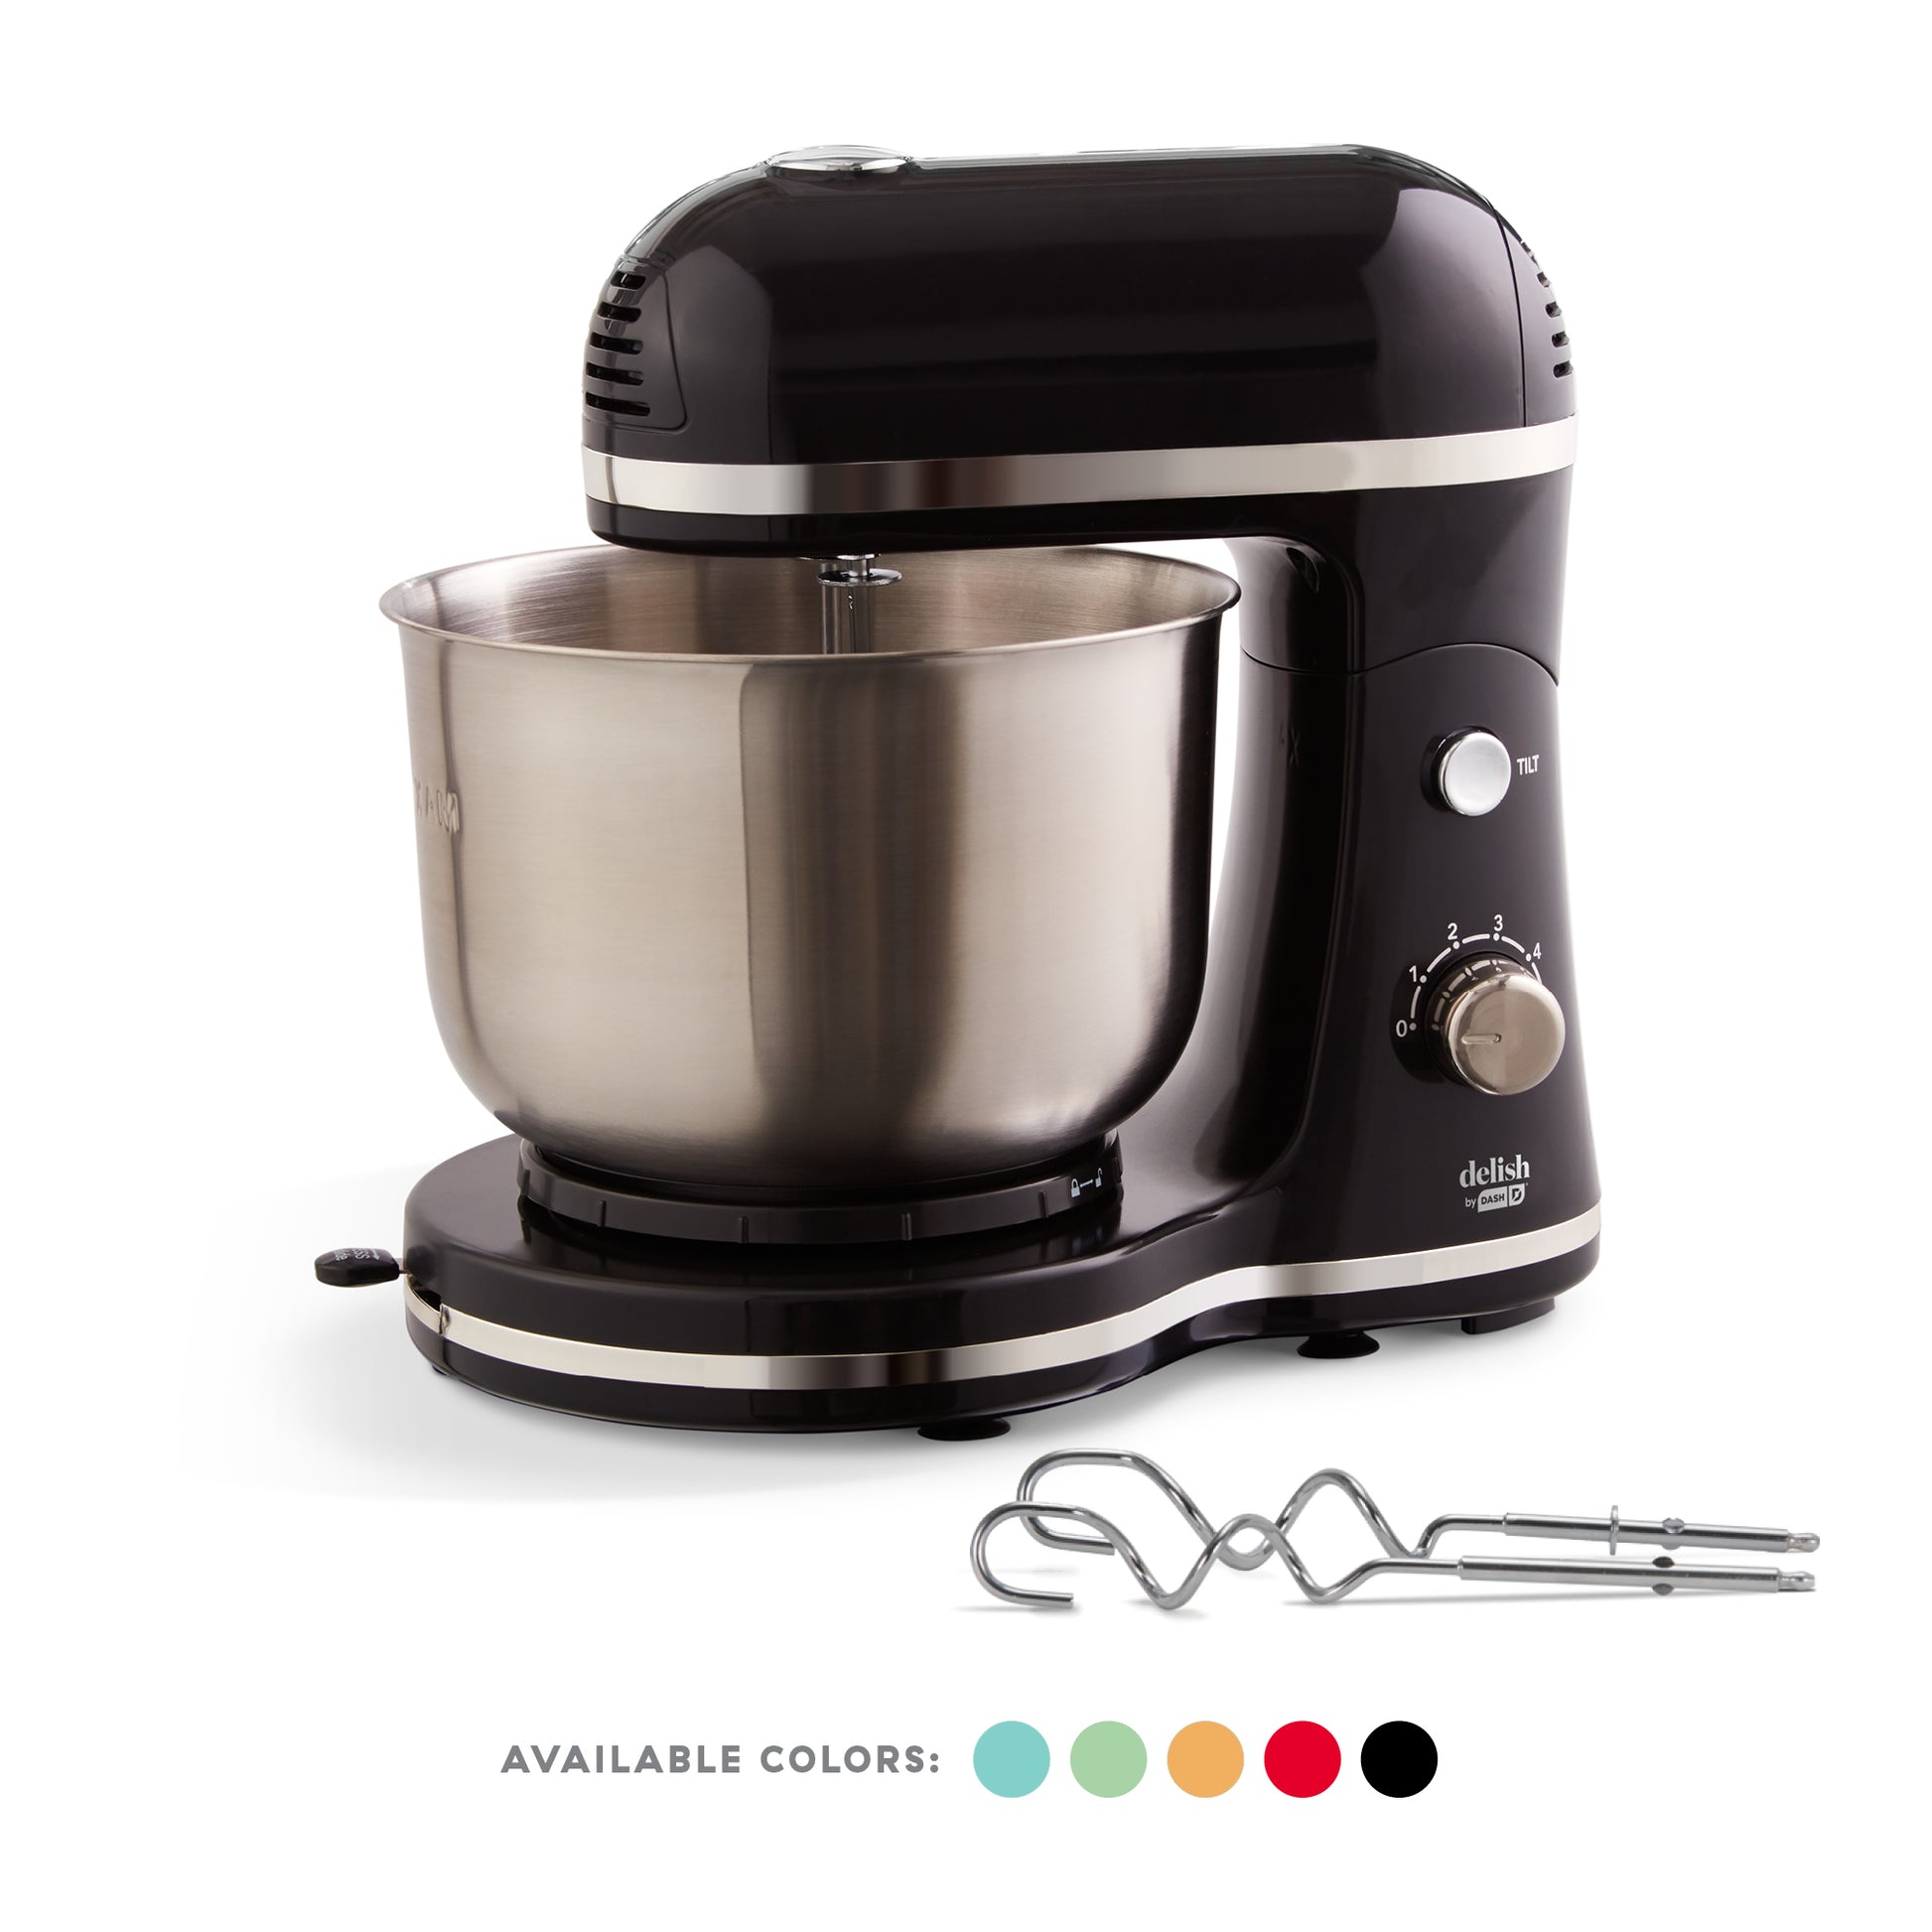 The Delish by Dash Compact Mixer